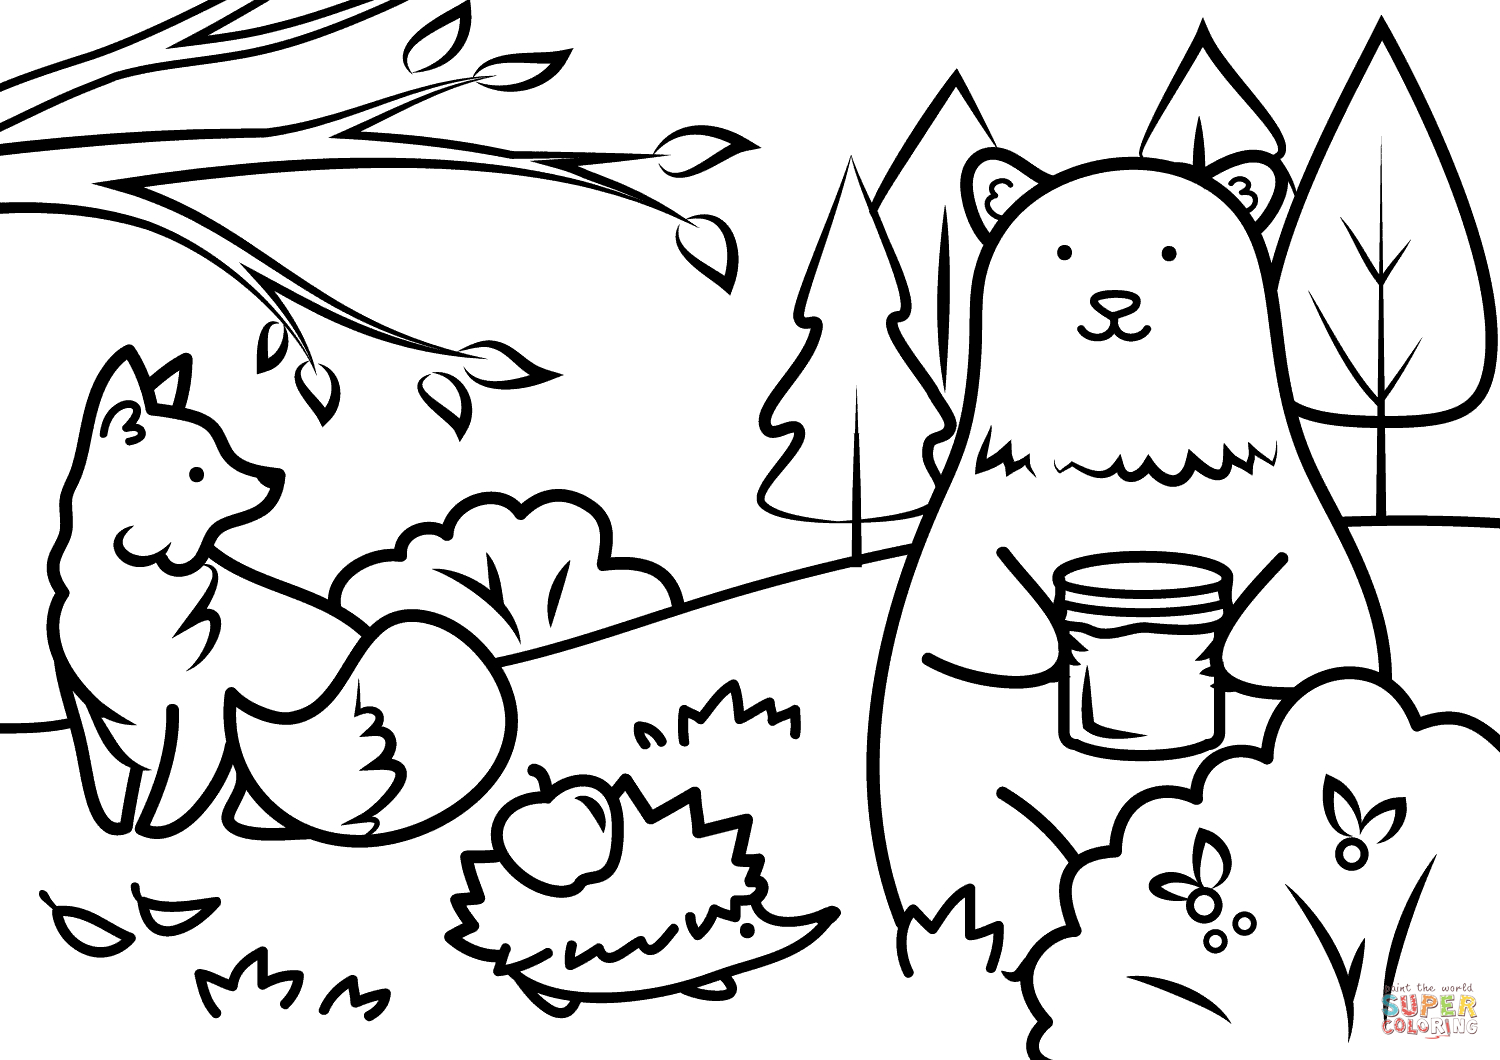 Autumn Animals Coloring Page | Free Printable Coloring Pages - Free Printable Coloring Pages Fall Season